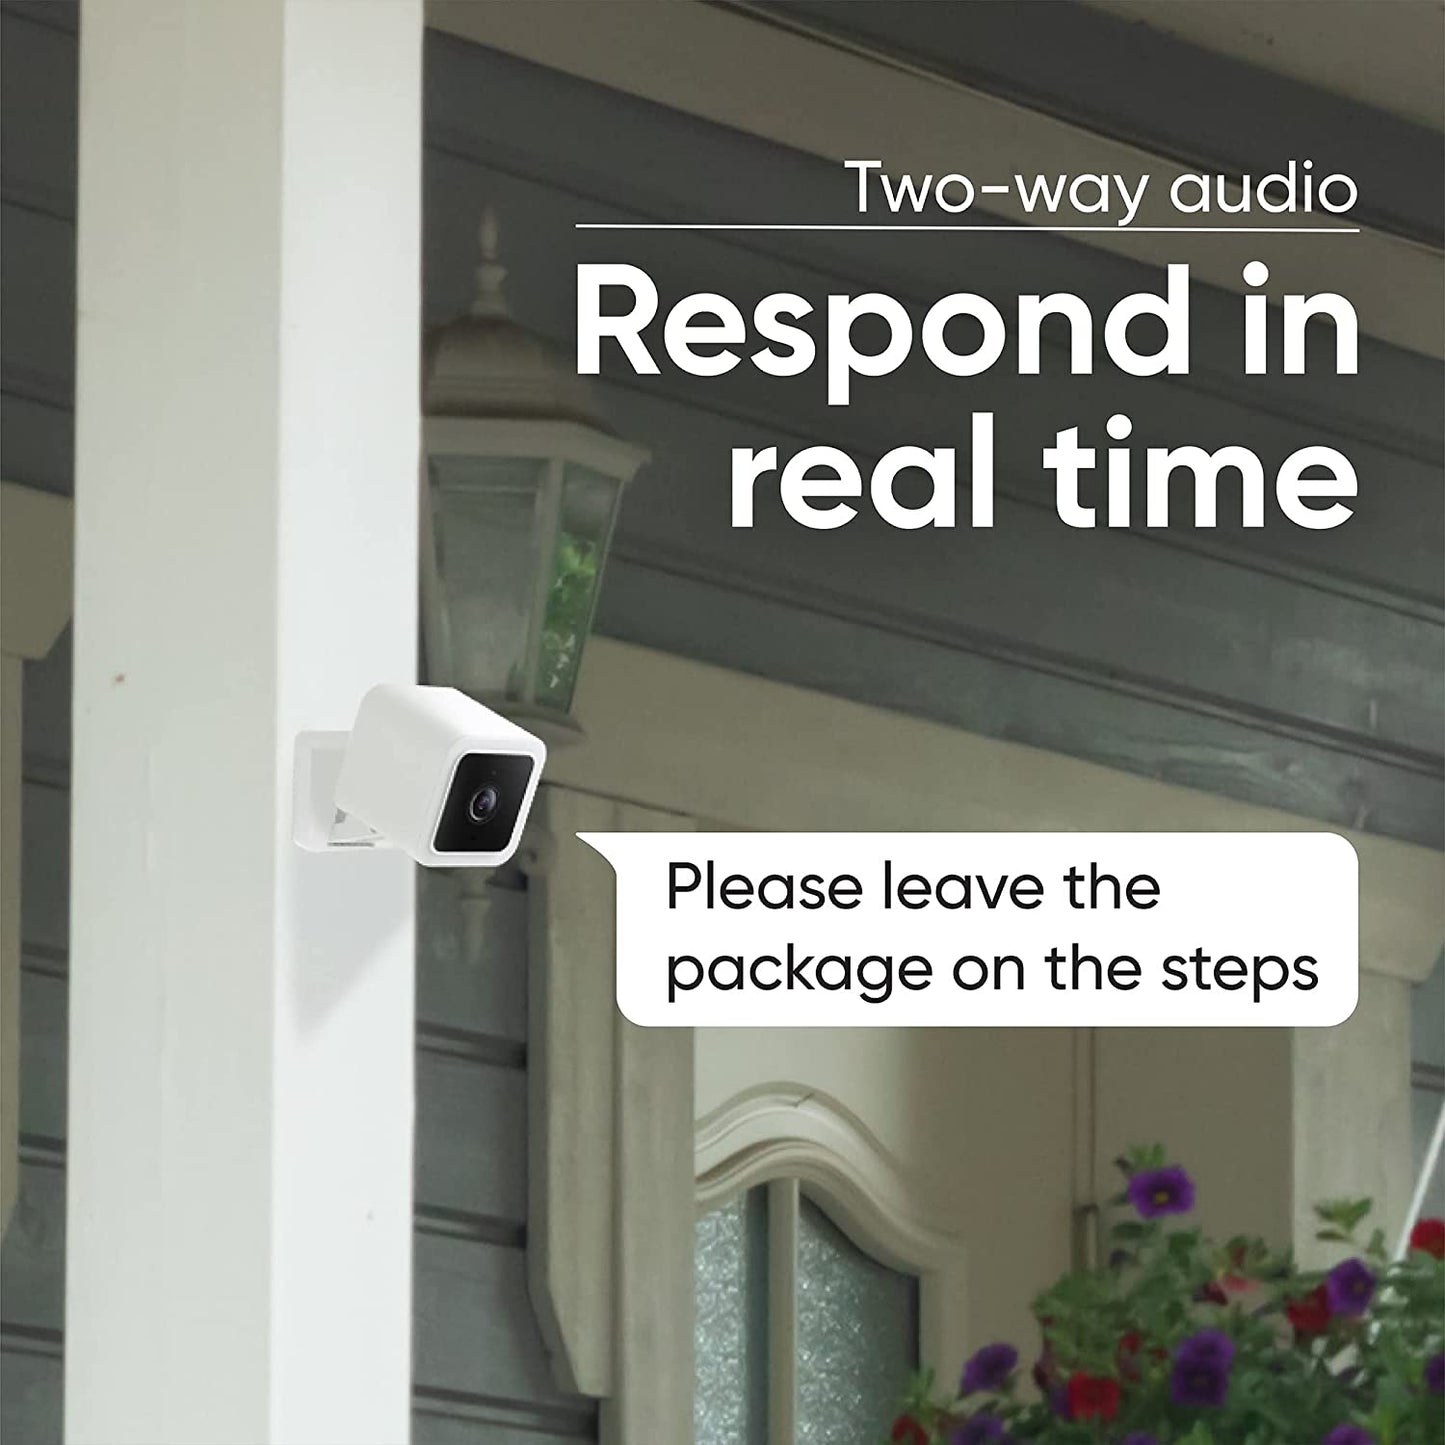 Camera mounted to pillar. Text overlay that says "Two-way audio." showing people can hear you through the camera. 